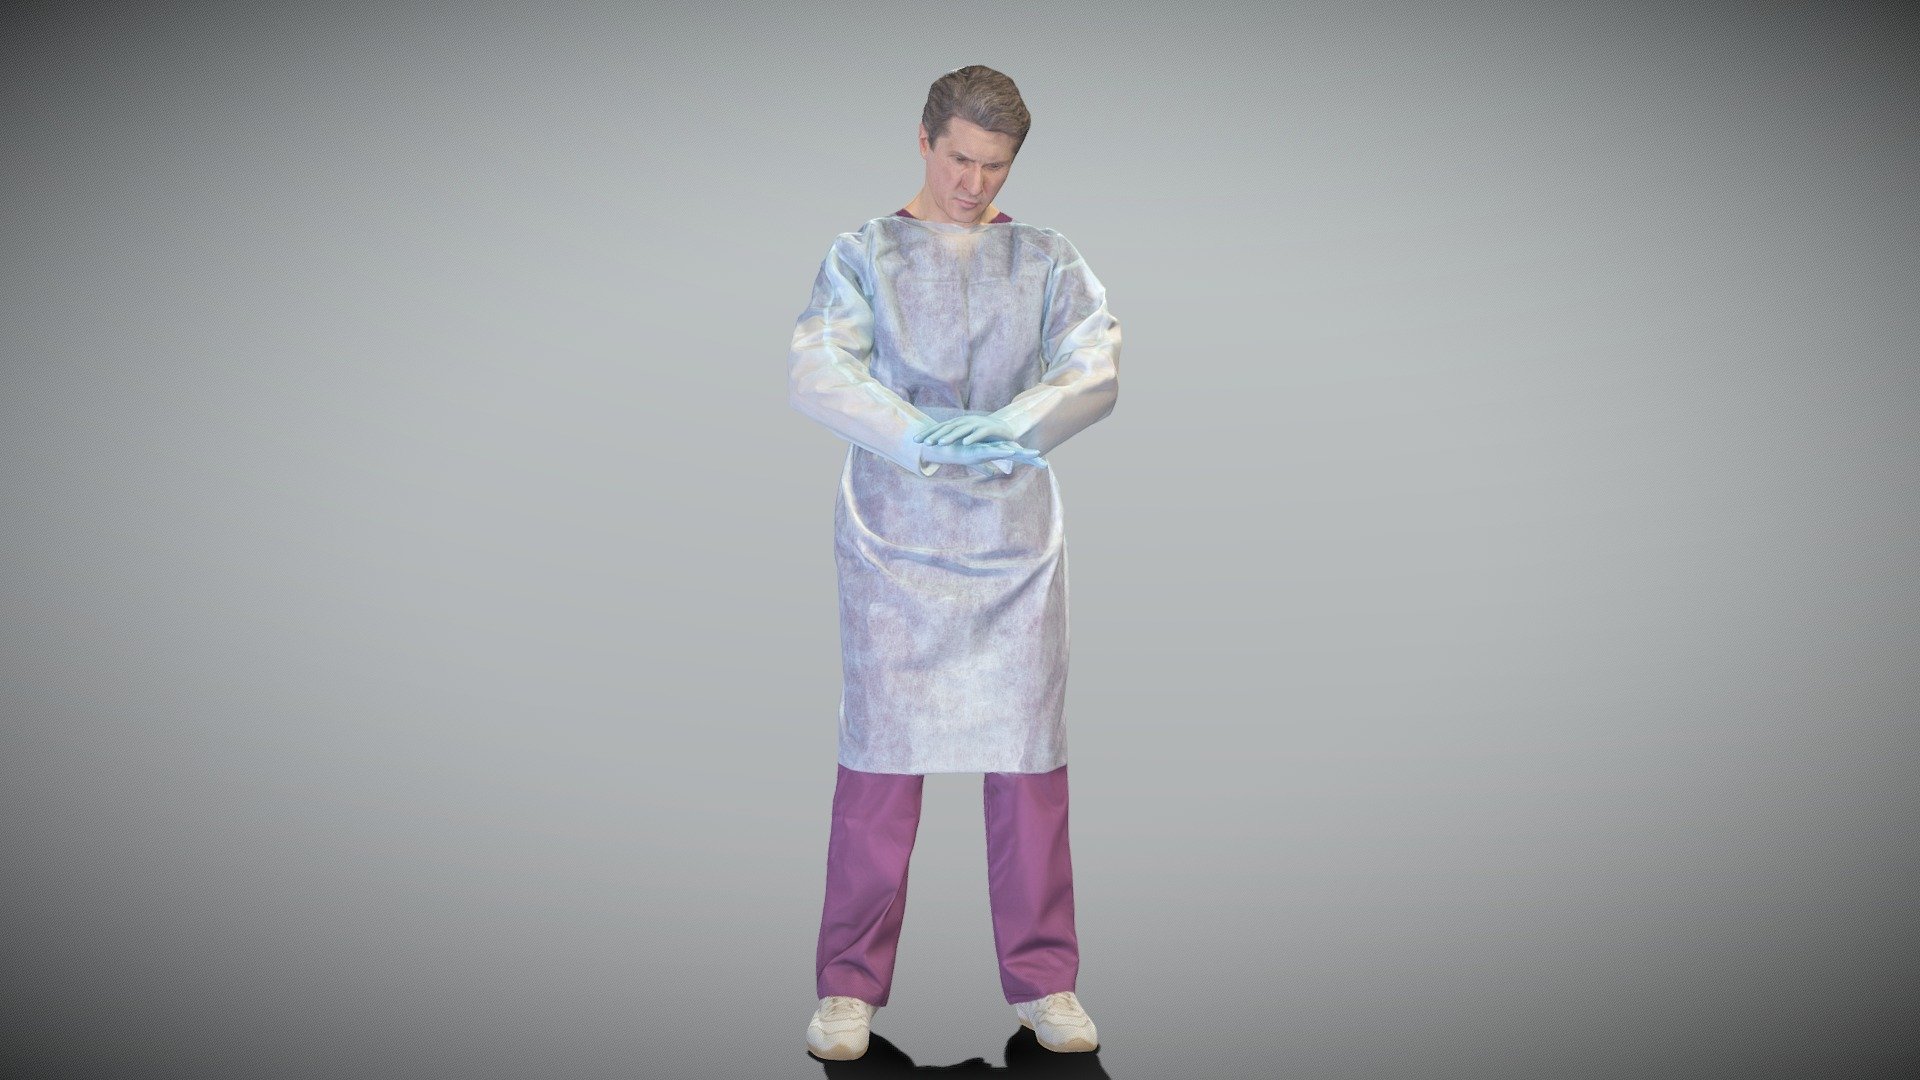 This is a true human size and detailed model of an adult man of Caucasian appearance dressed in a surgical uniform. The model is captured in typical professional pose to perfectly match a variety of architectural and product visualizations, be used as a background or mid-sized character in advert banners, professional products/devices presentations, educational tutorials, etc.

Technical characteristics:




digital double 3d scan model

decimated model (100k triangles)

sufficiently clean

PBR textures: Diffuse, Normal, Specular maps

non-overlapping UV map

Download package includes Cinema 4D project file with Redshift shader, OBJ, FBX files, which are applicable for 3ds Max, Maya, Unreal Engine, Unity, Blender, etc. All the textures included into the main archive.

BONUSE: in this package you will also get a high-poly (.ztl tool) clean and retopologized automatically via ZRemesher 3d model in zBrush, thus youll be able to make your own editing of the purchased 3d model.

3D EVERYTHING - Male doctor performing CPR 351 - Buy Royalty Free 3D model by deep3dstudio 3d model